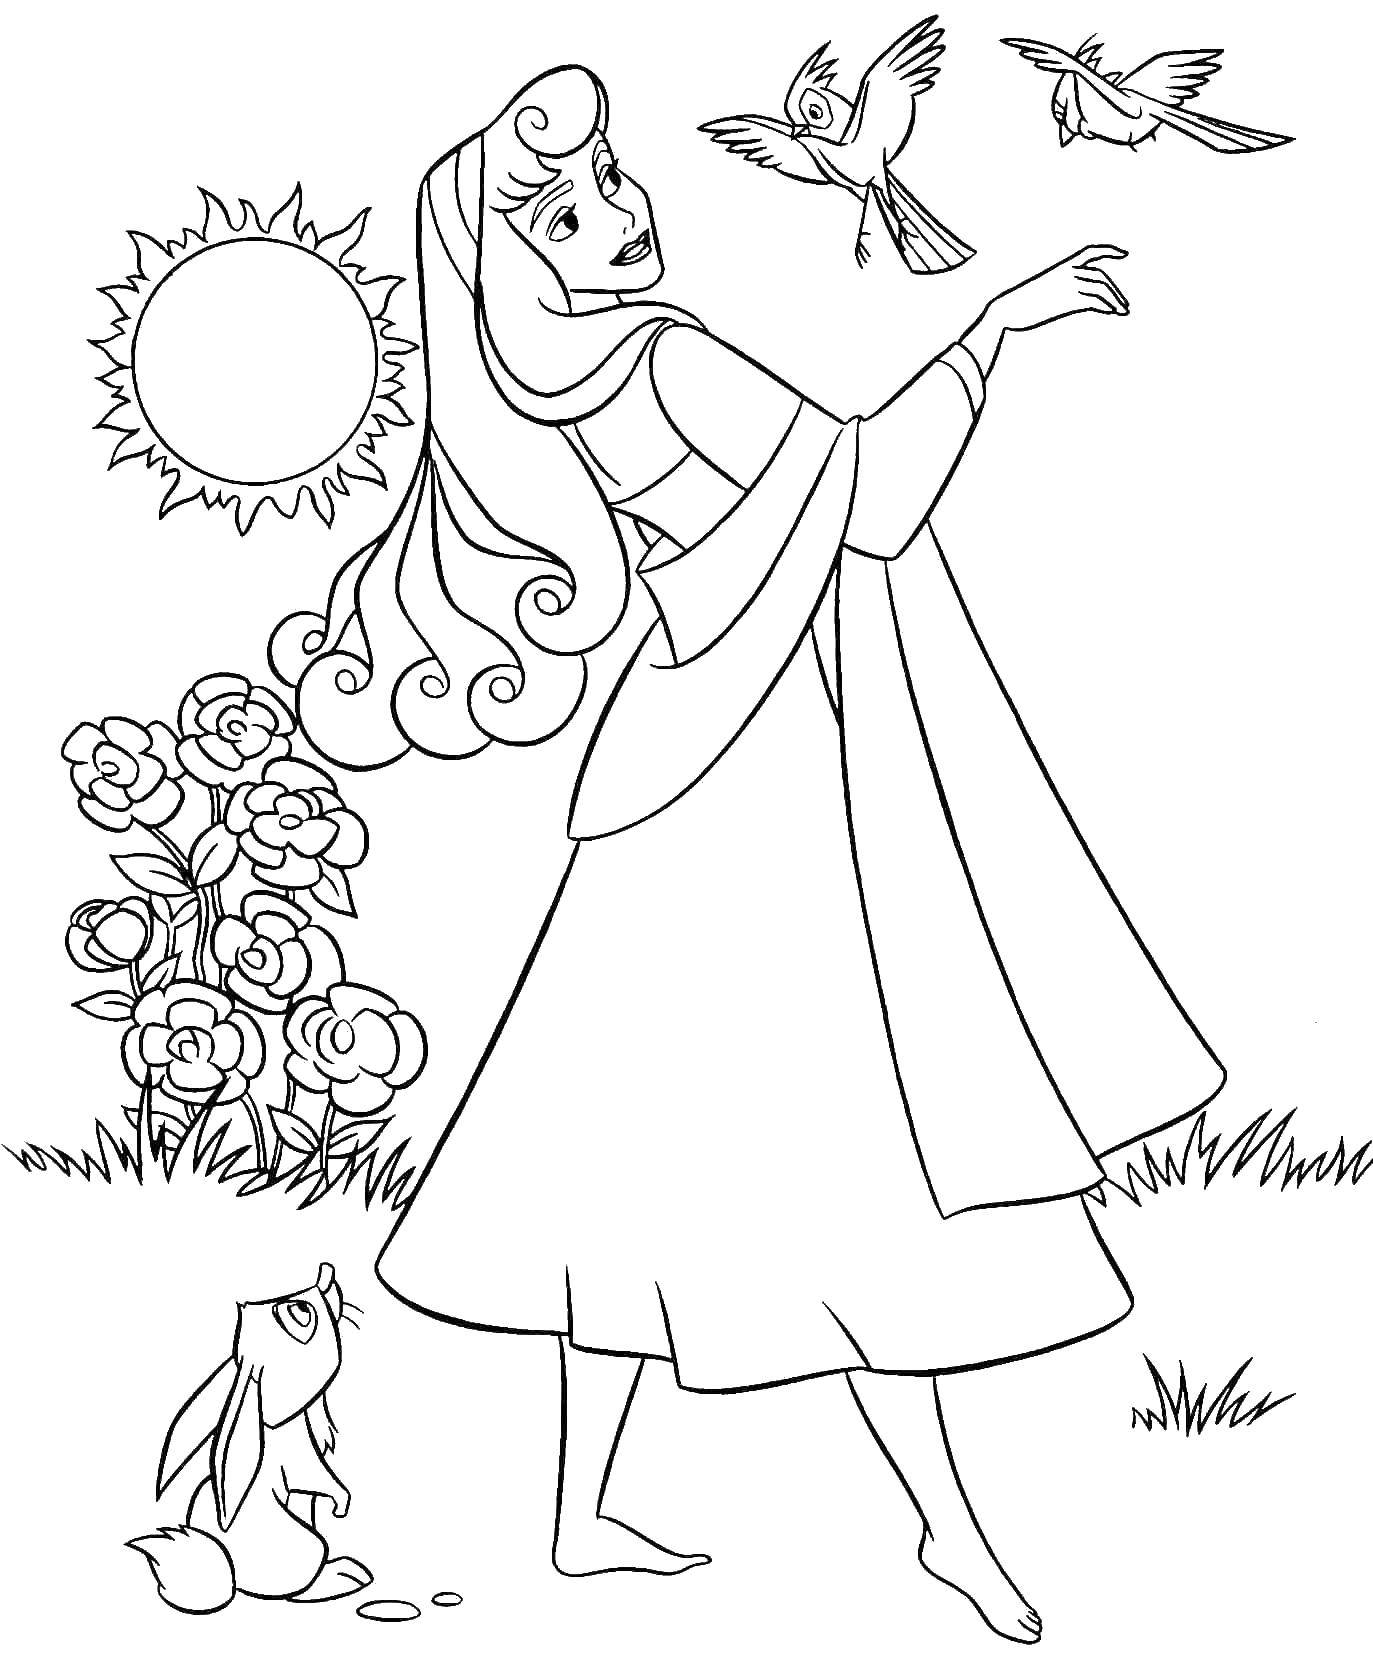 Coloring Aurora and her friends the birds. Category Disney coloring pages. Tags:  Sleeping beauty, Disney.